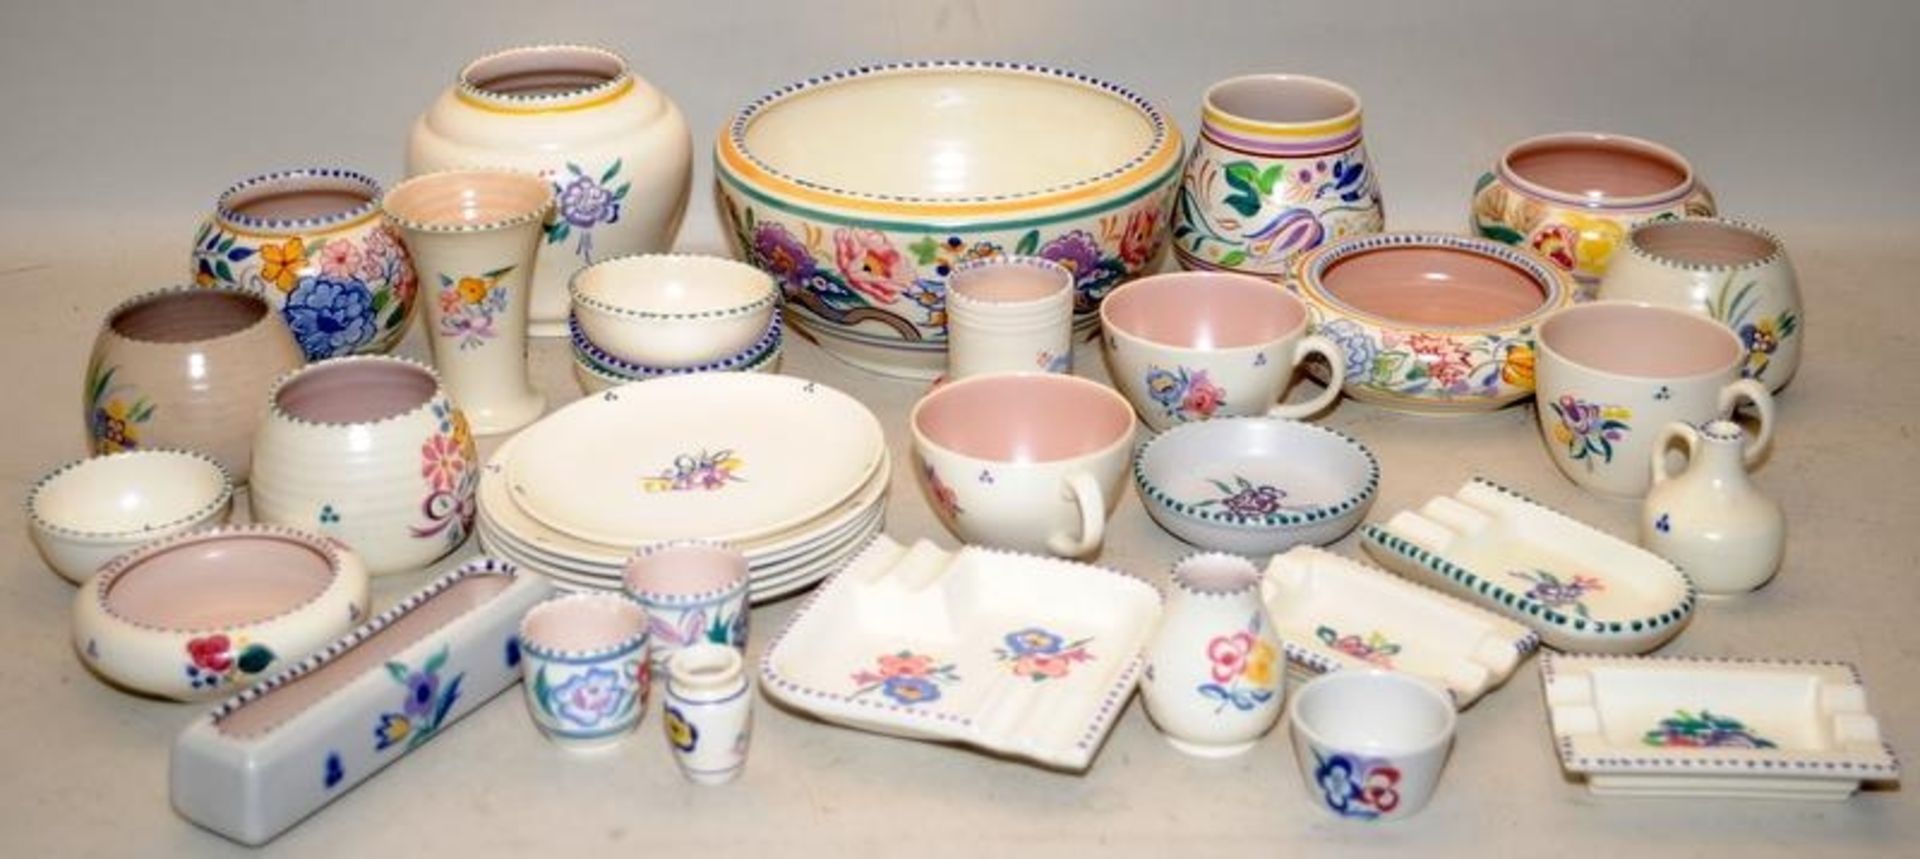 Large collection of vintage Poole Pottery in the traditional patterns